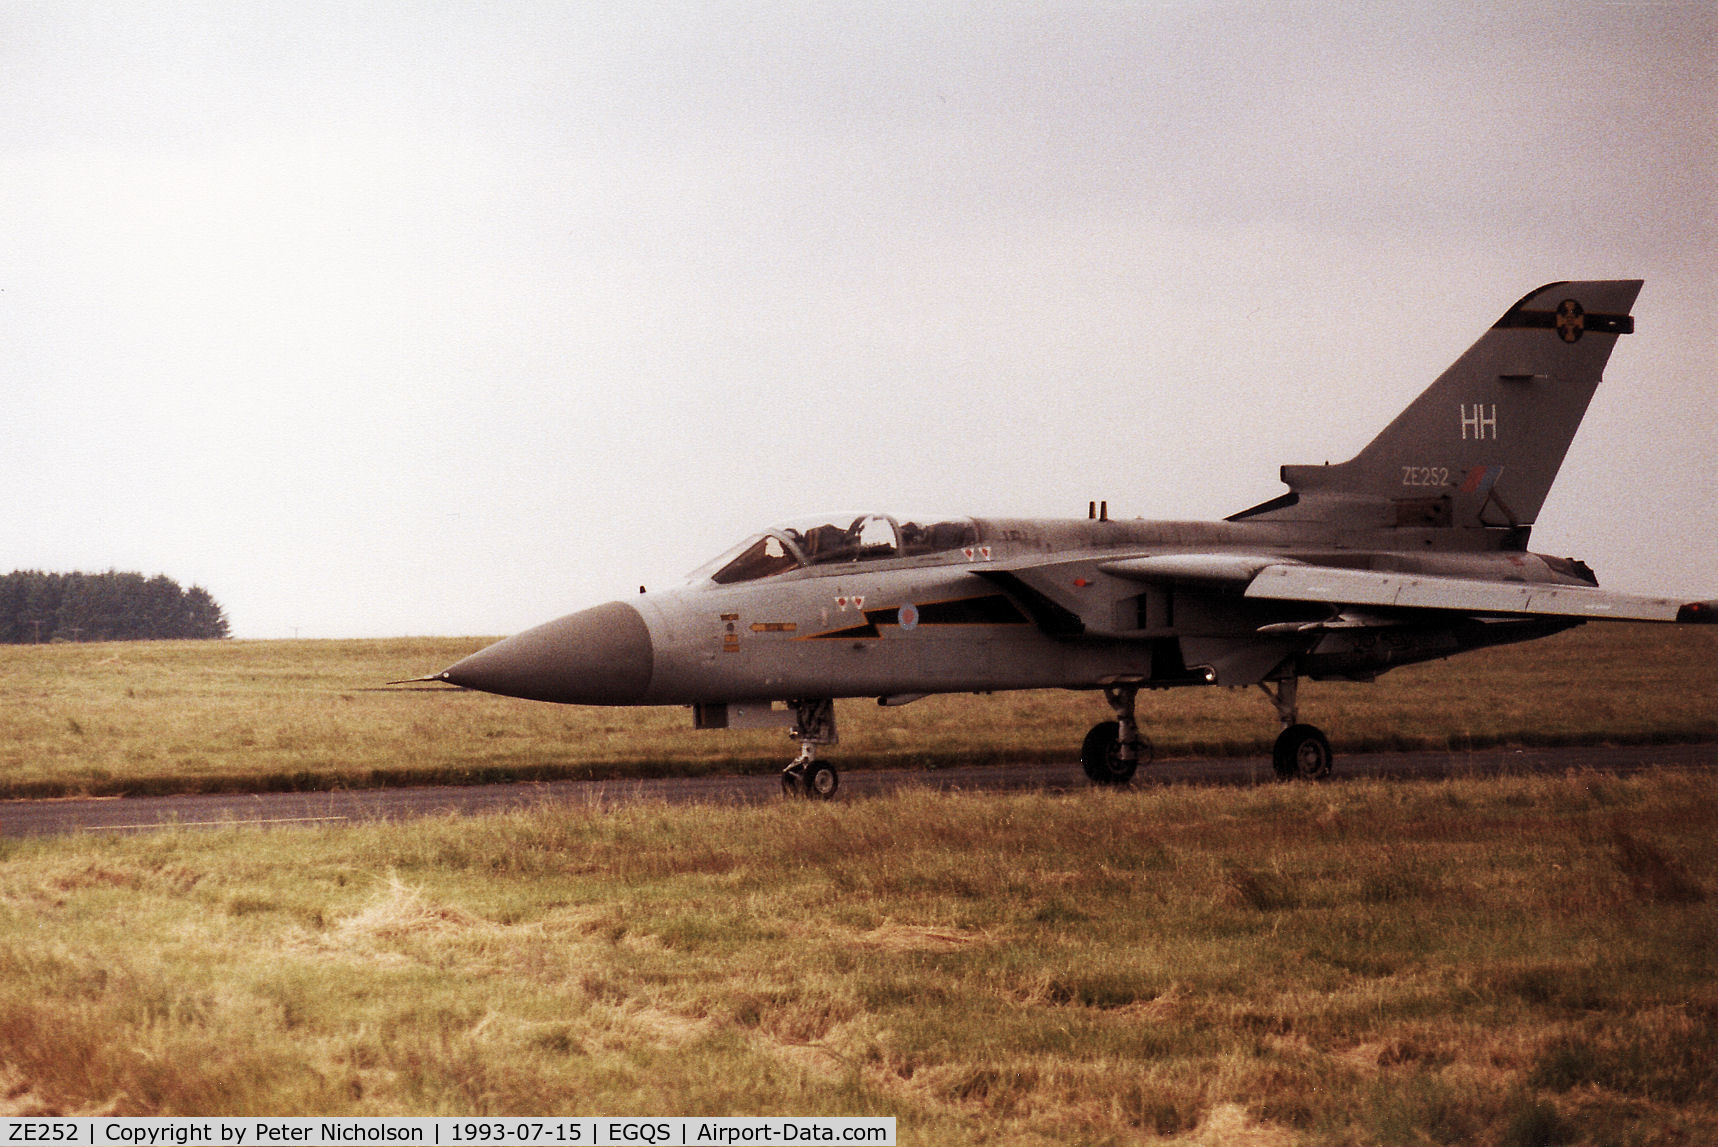 ZE252, 1987 Panavia Tornado F.3 C/N AS030/595/3266, Tornado F.3, callsign Scimitar 2, of 111 Squadron at RAF Leuchars taxying to the active runway at RAF Lossiemouth in the Summer of 1993.